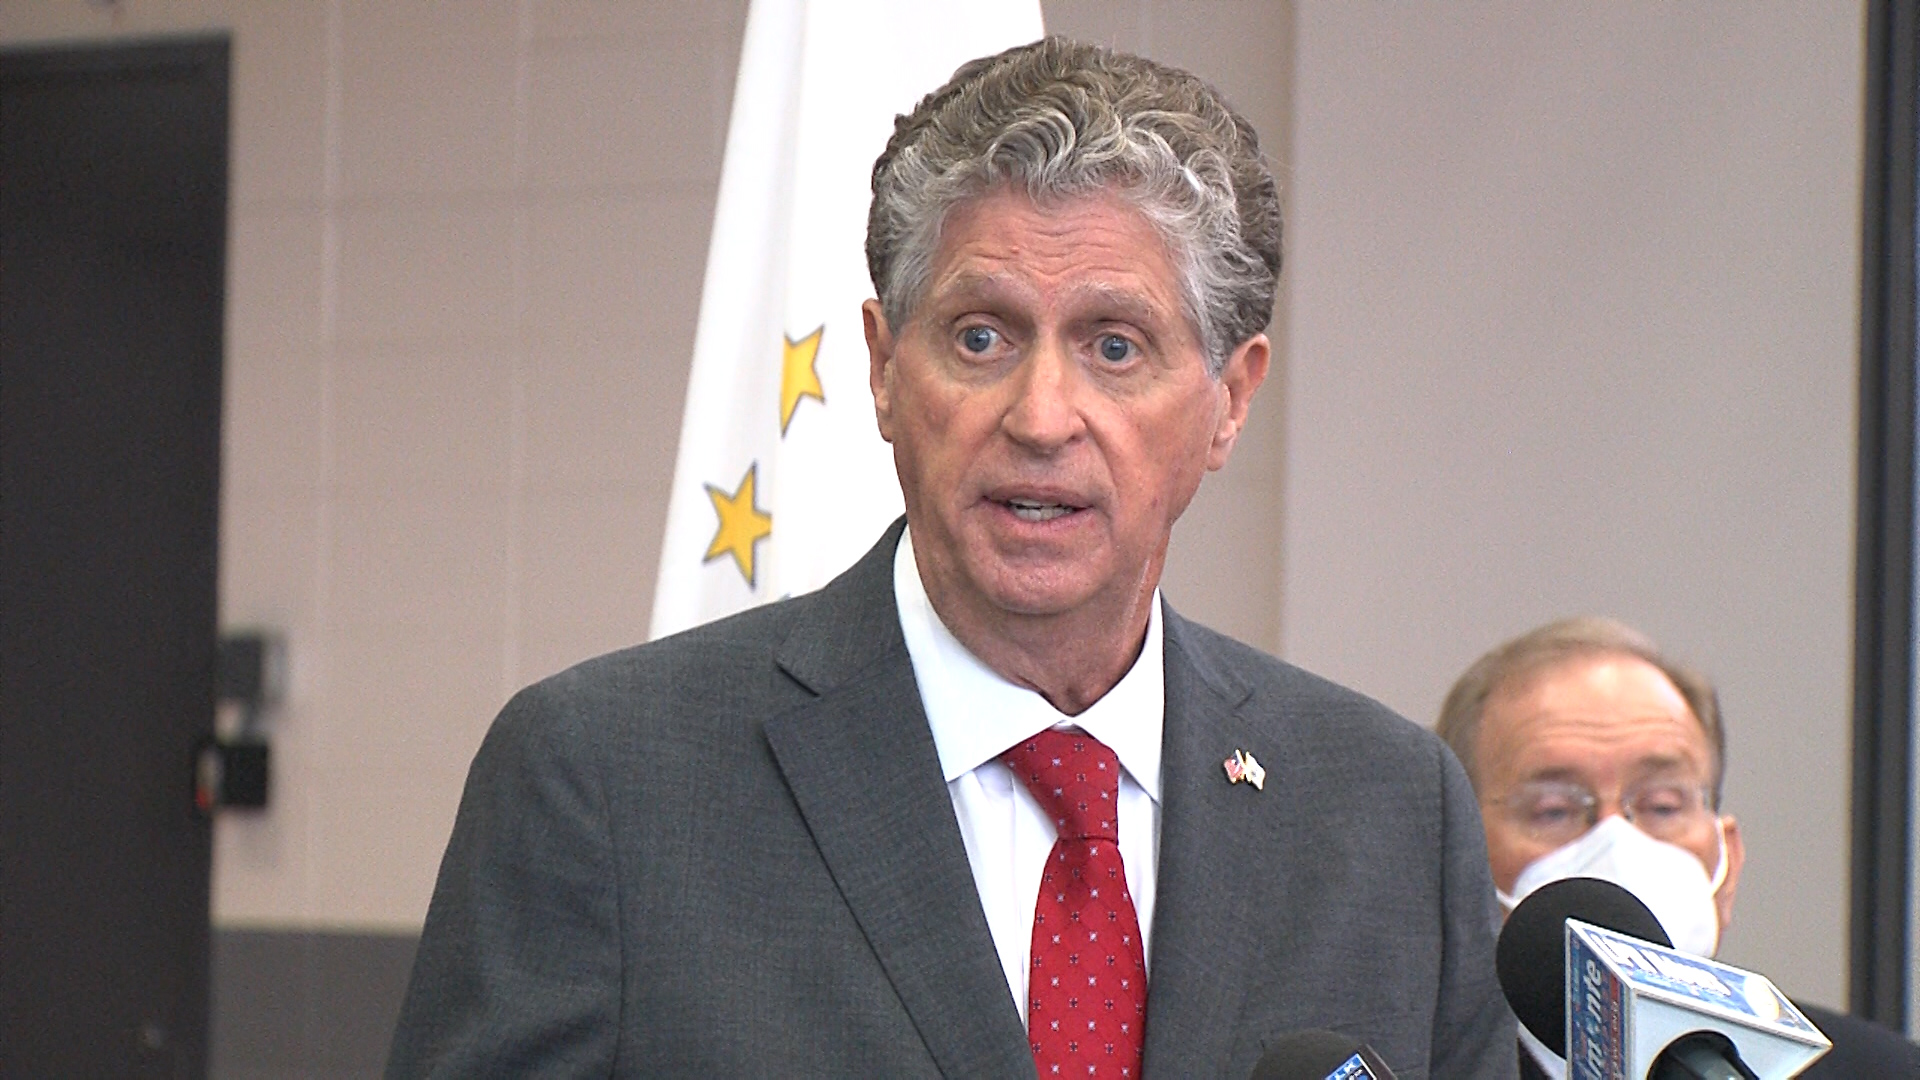 Governor McKee: Here is how Rhode Island is preparing for